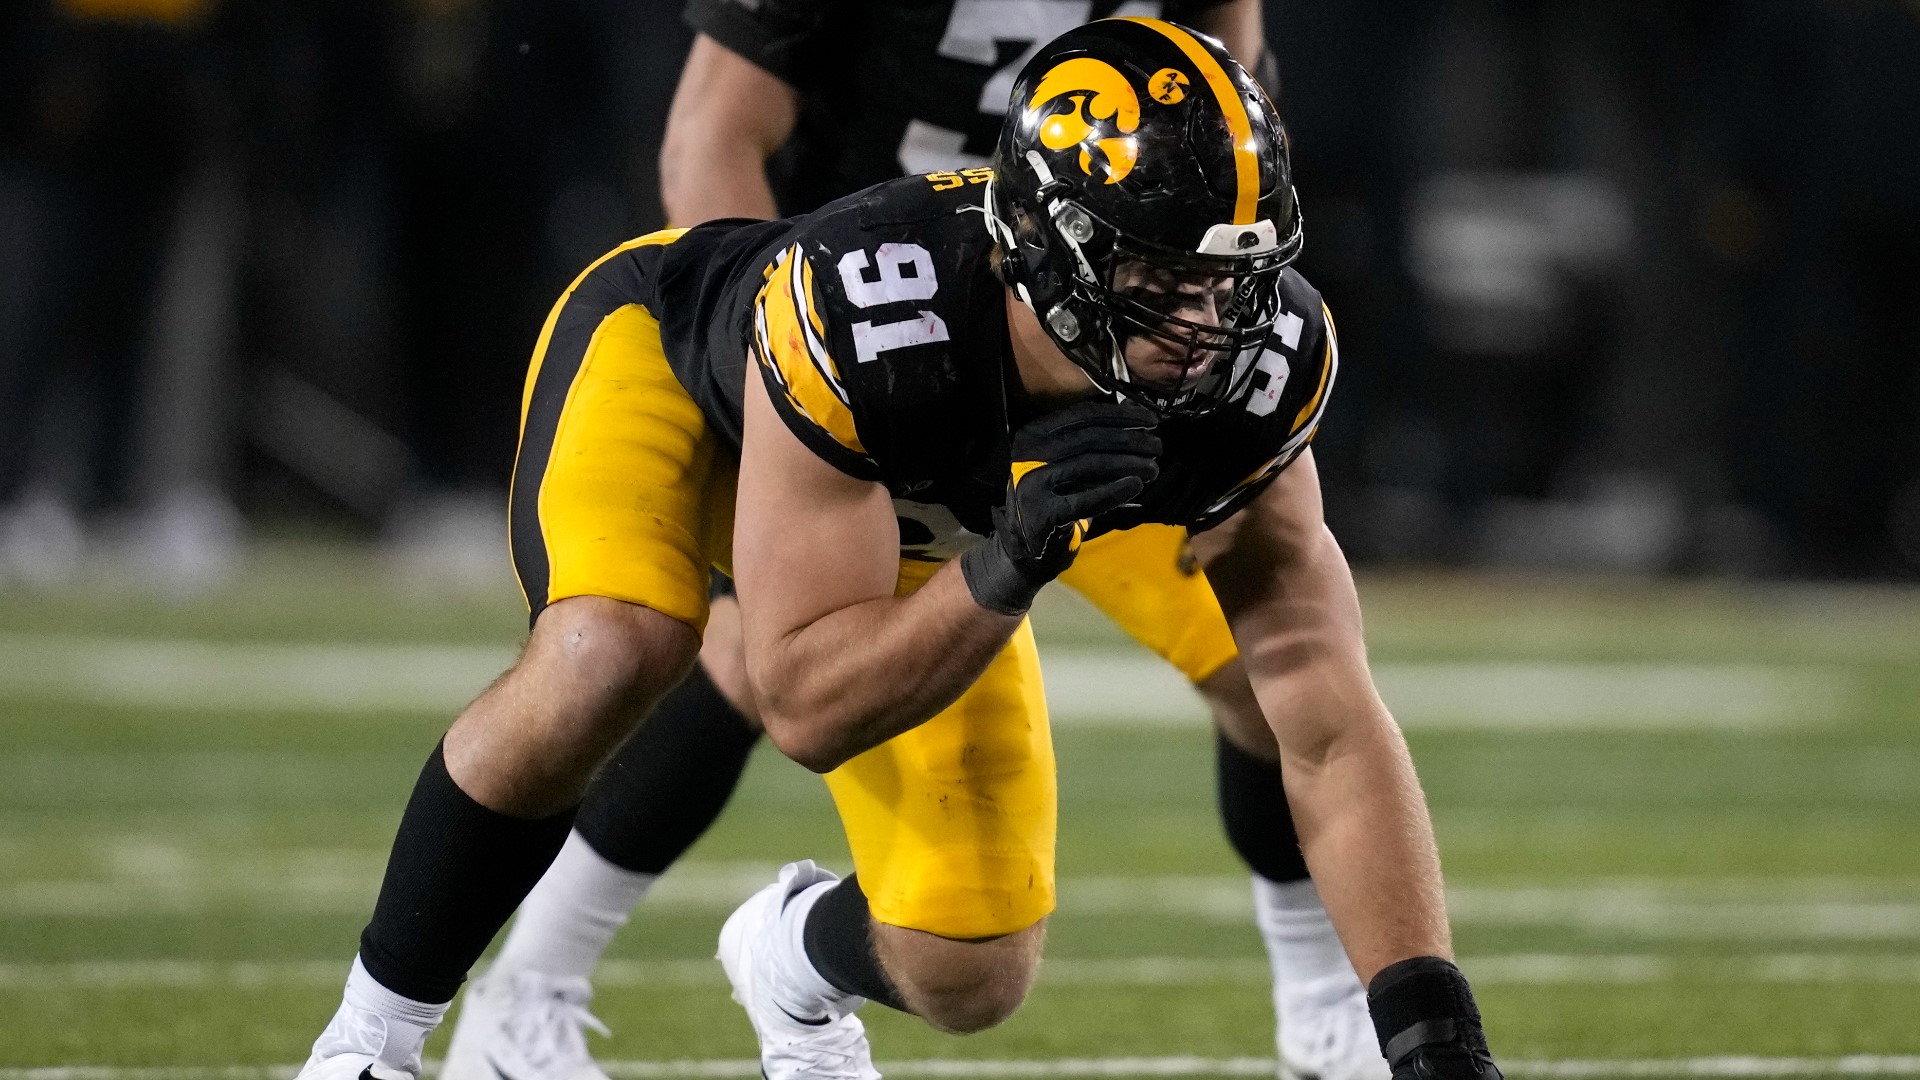 Lukas Van Ness, a Barrington, Ill. native, has found his home in the National Football League.